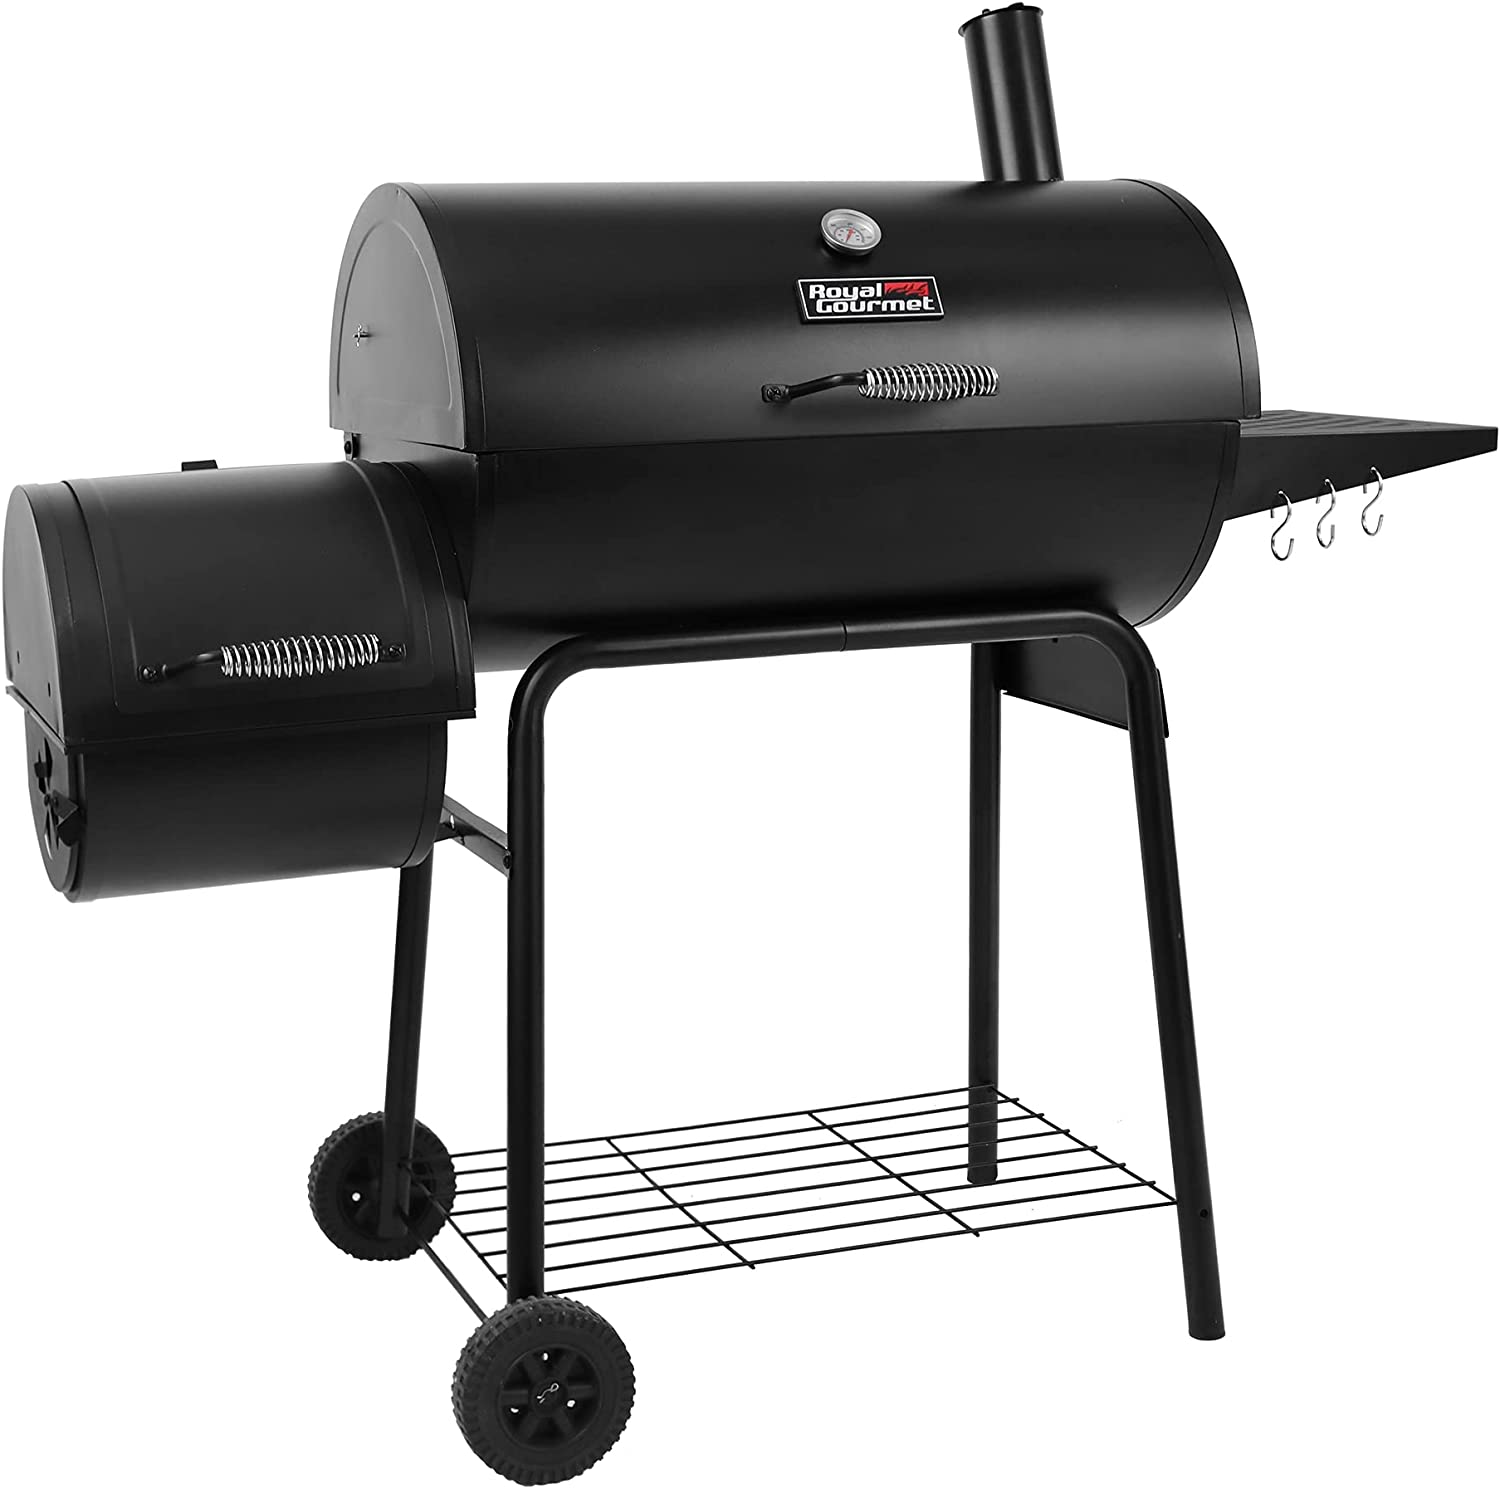 Royal Gourmet CC1830R 30-Inch Barrel Charcoal Grill with Offset Smoker